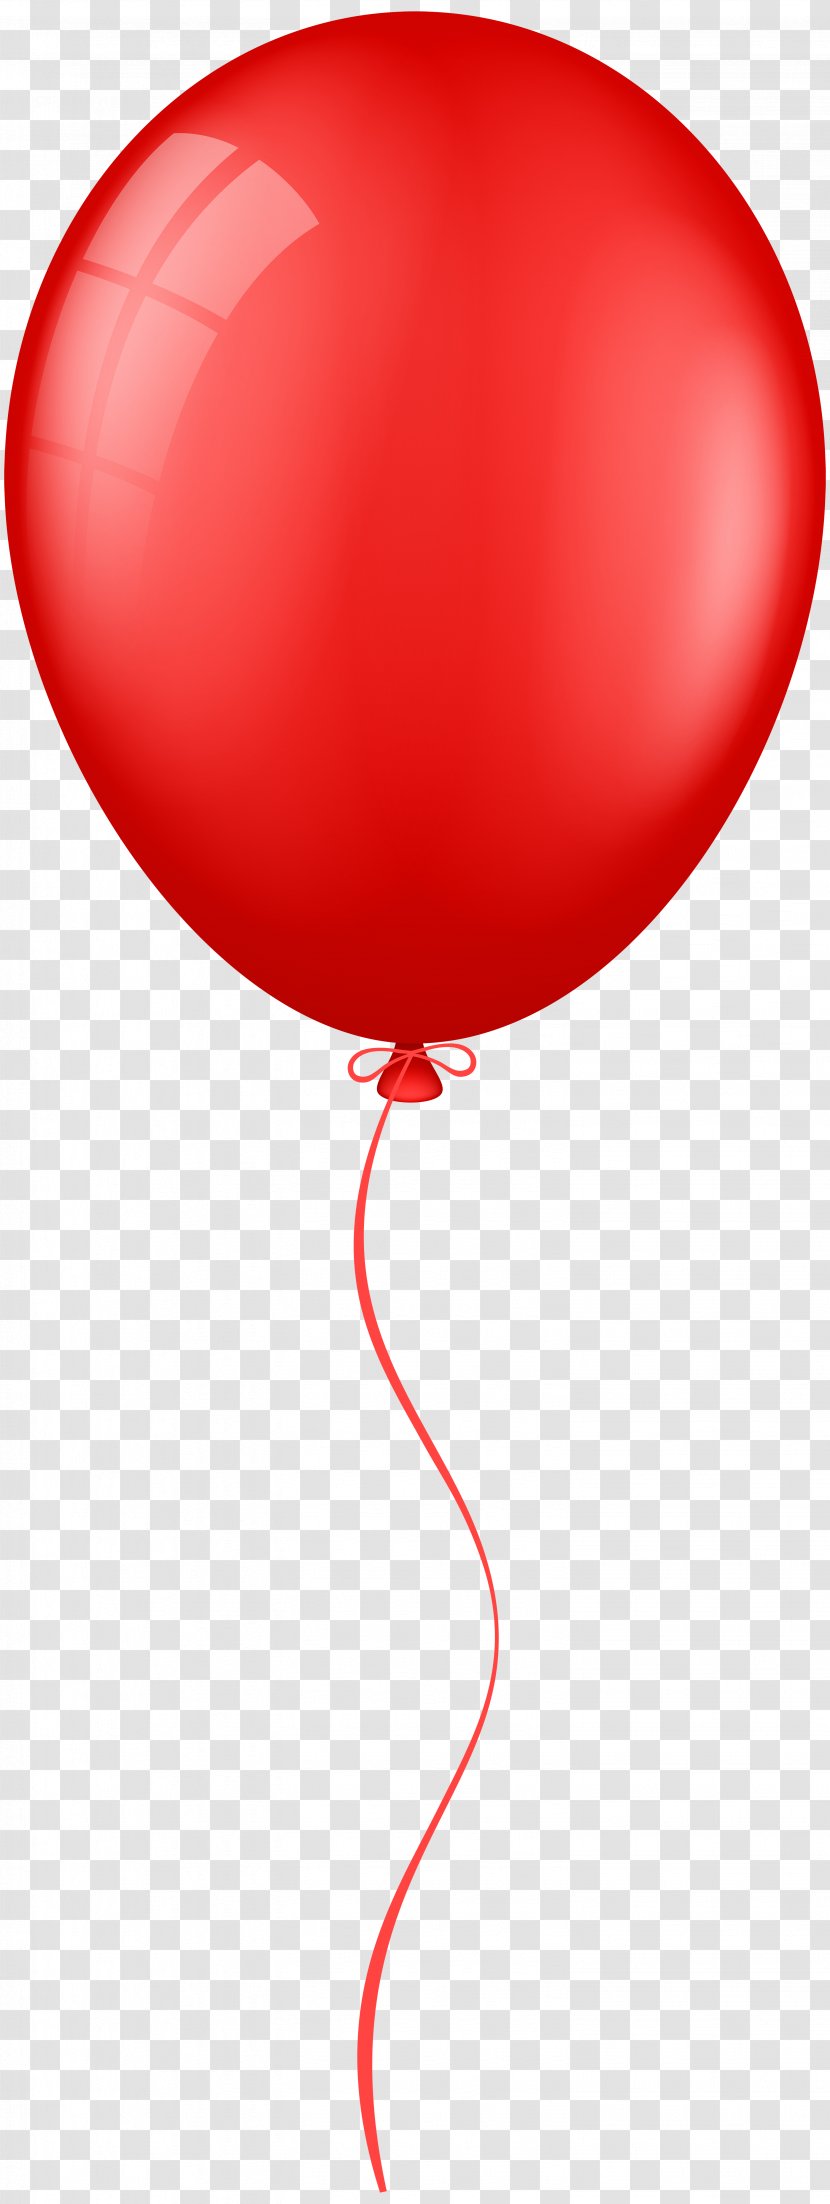 Balloon Red Clip Art - Watercolor Transparent PNG